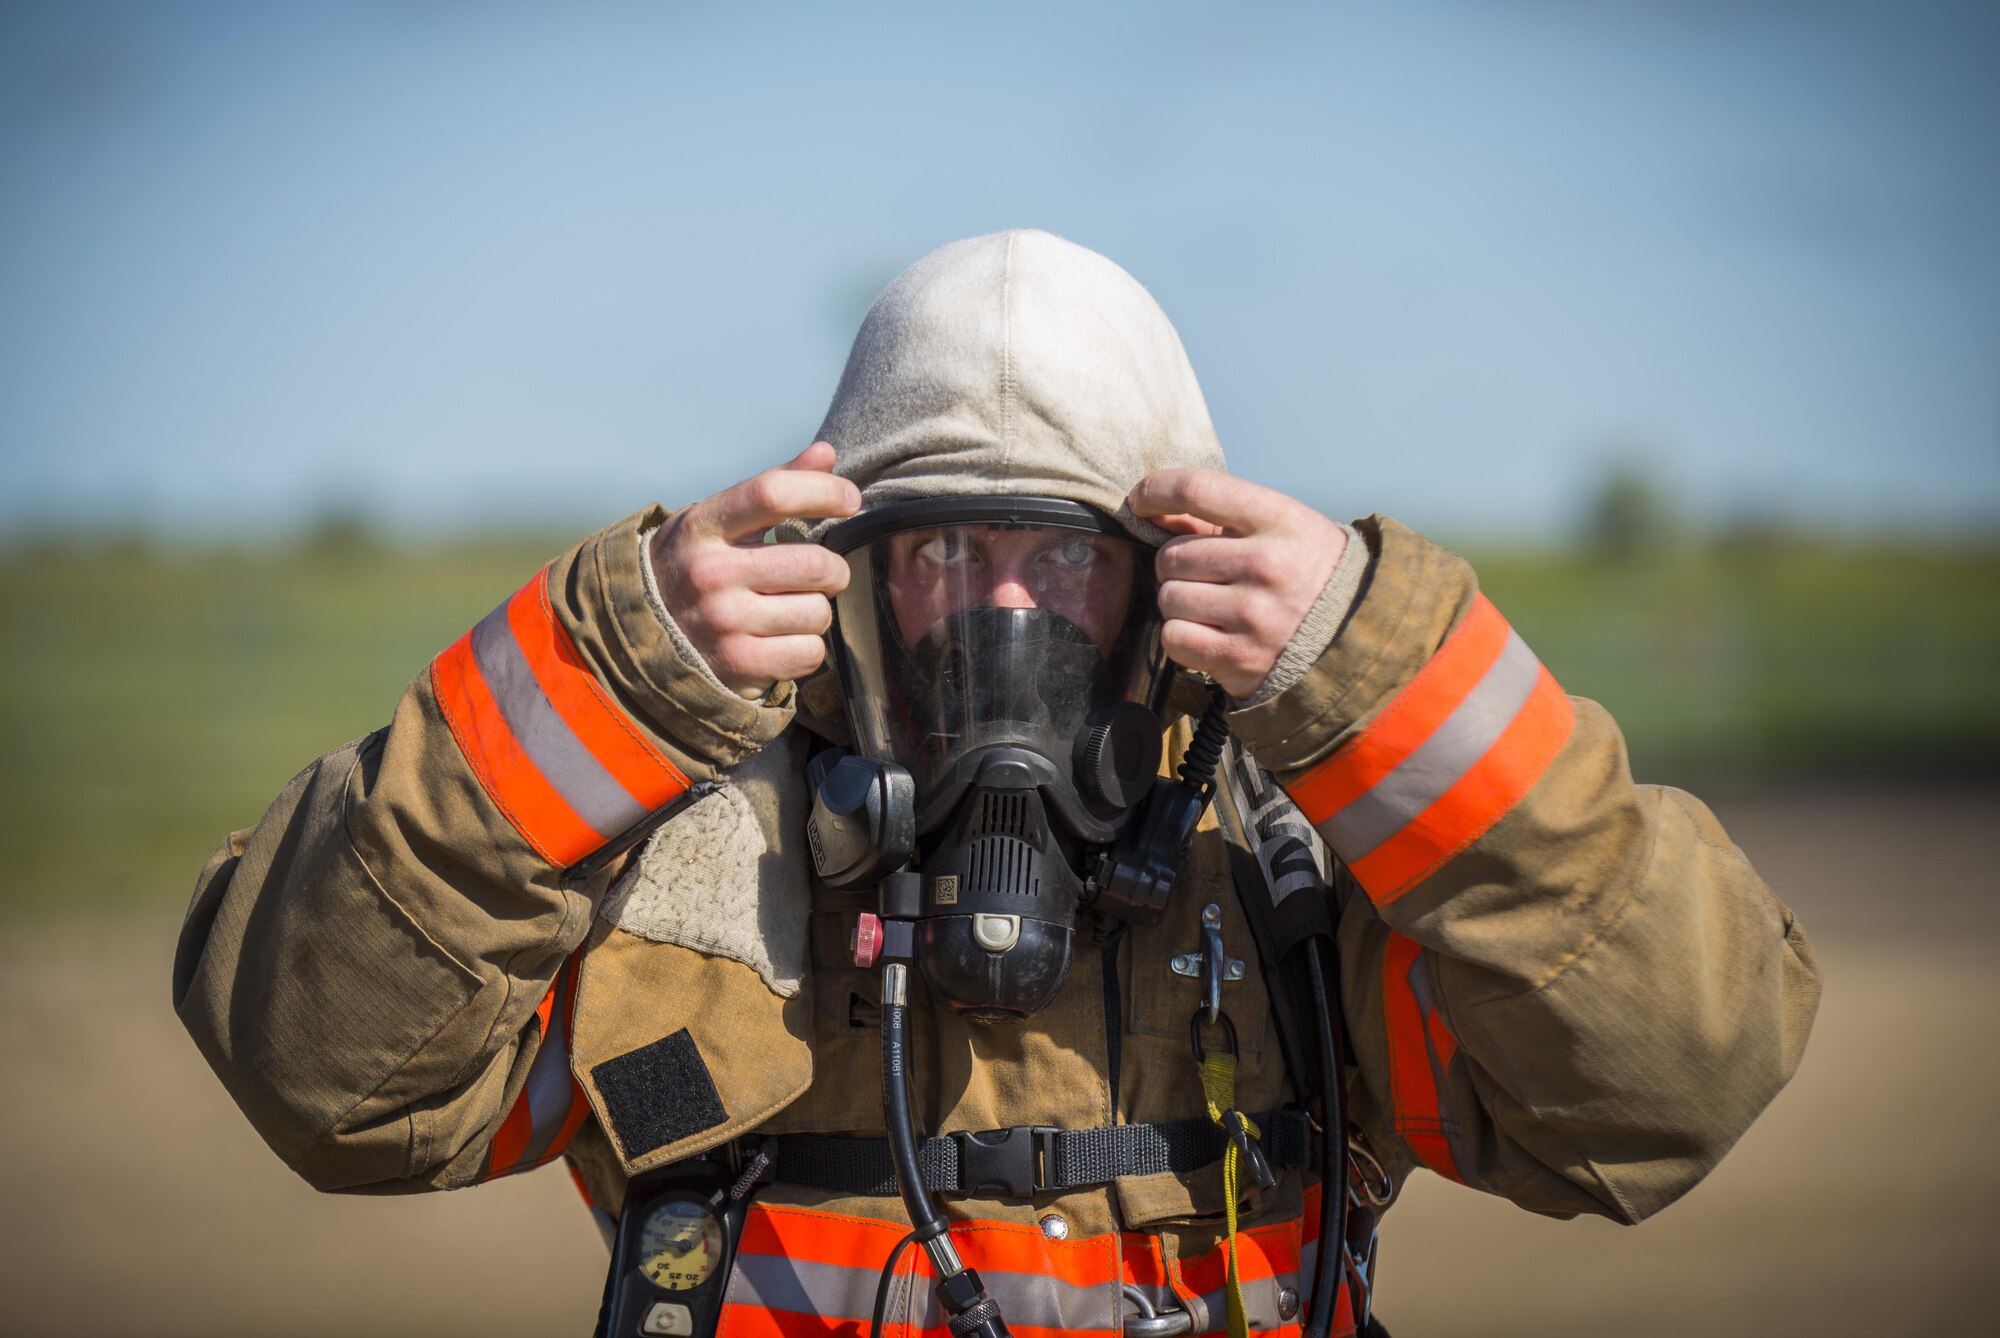 A 5th Civil Engineer Squadron firefighter puts on his firefighting gear at Minot Air Force Base, N.D., July 8, 2016. The fire protection flight’s goal is to protect MAFB’s people, property and the environment from fires and disasters by providing fire prevention, firefighting, rescue and hazardous material response. (U.S. Air Force photo/Airman 1st Class Christian Sullivan)